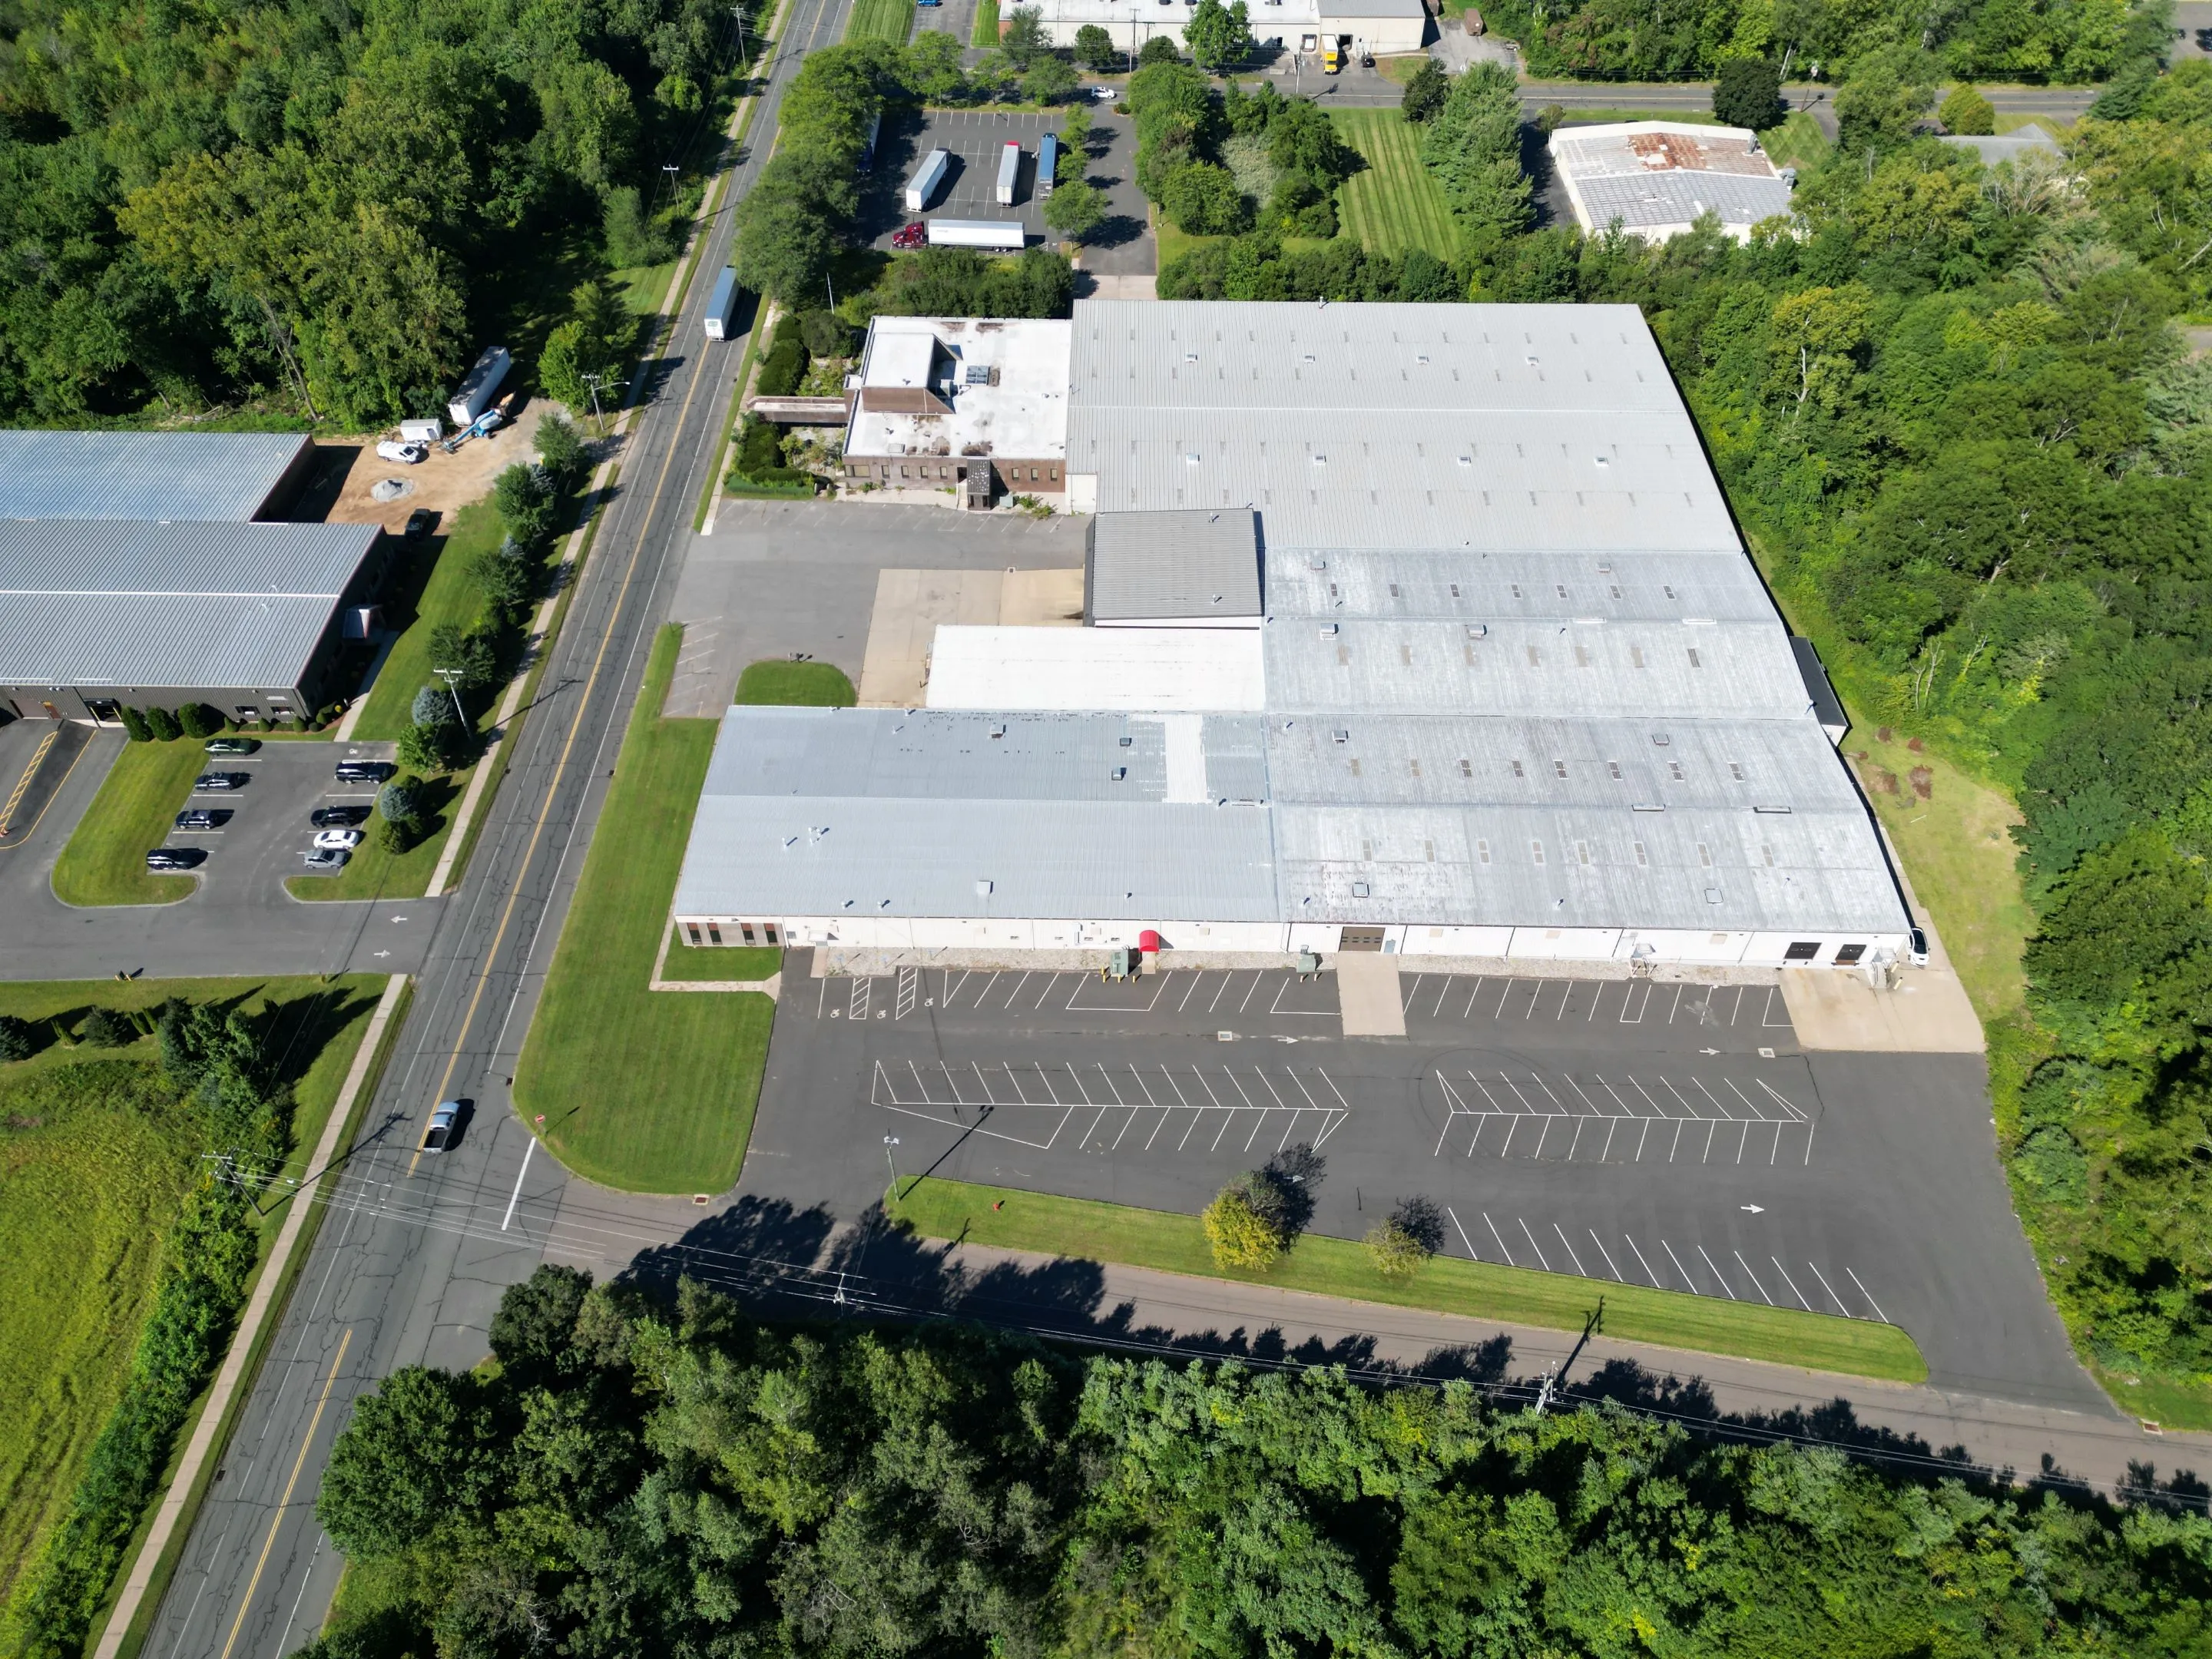 An aerial view of Stonewall Garage’s Car storage facility in Enfield Connecticut